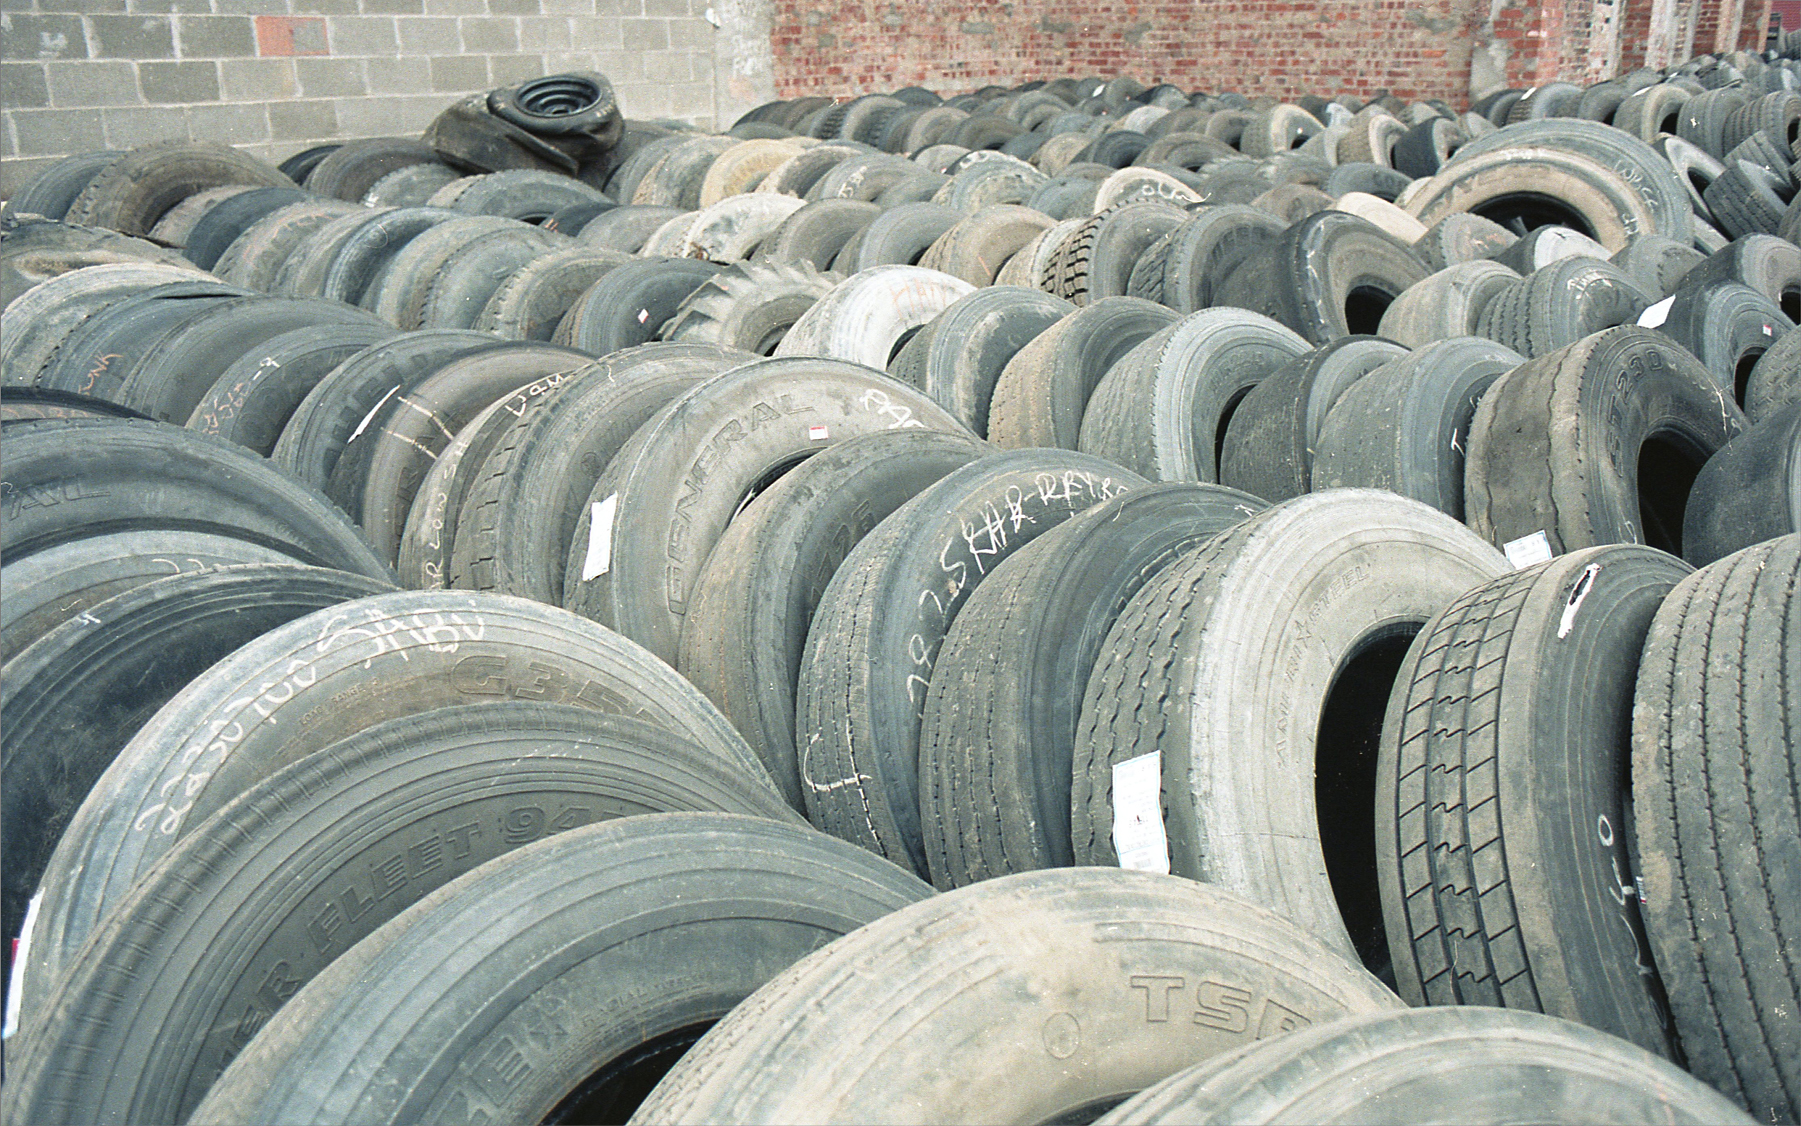 rows and piles of used, old tires sitting against a brick wall